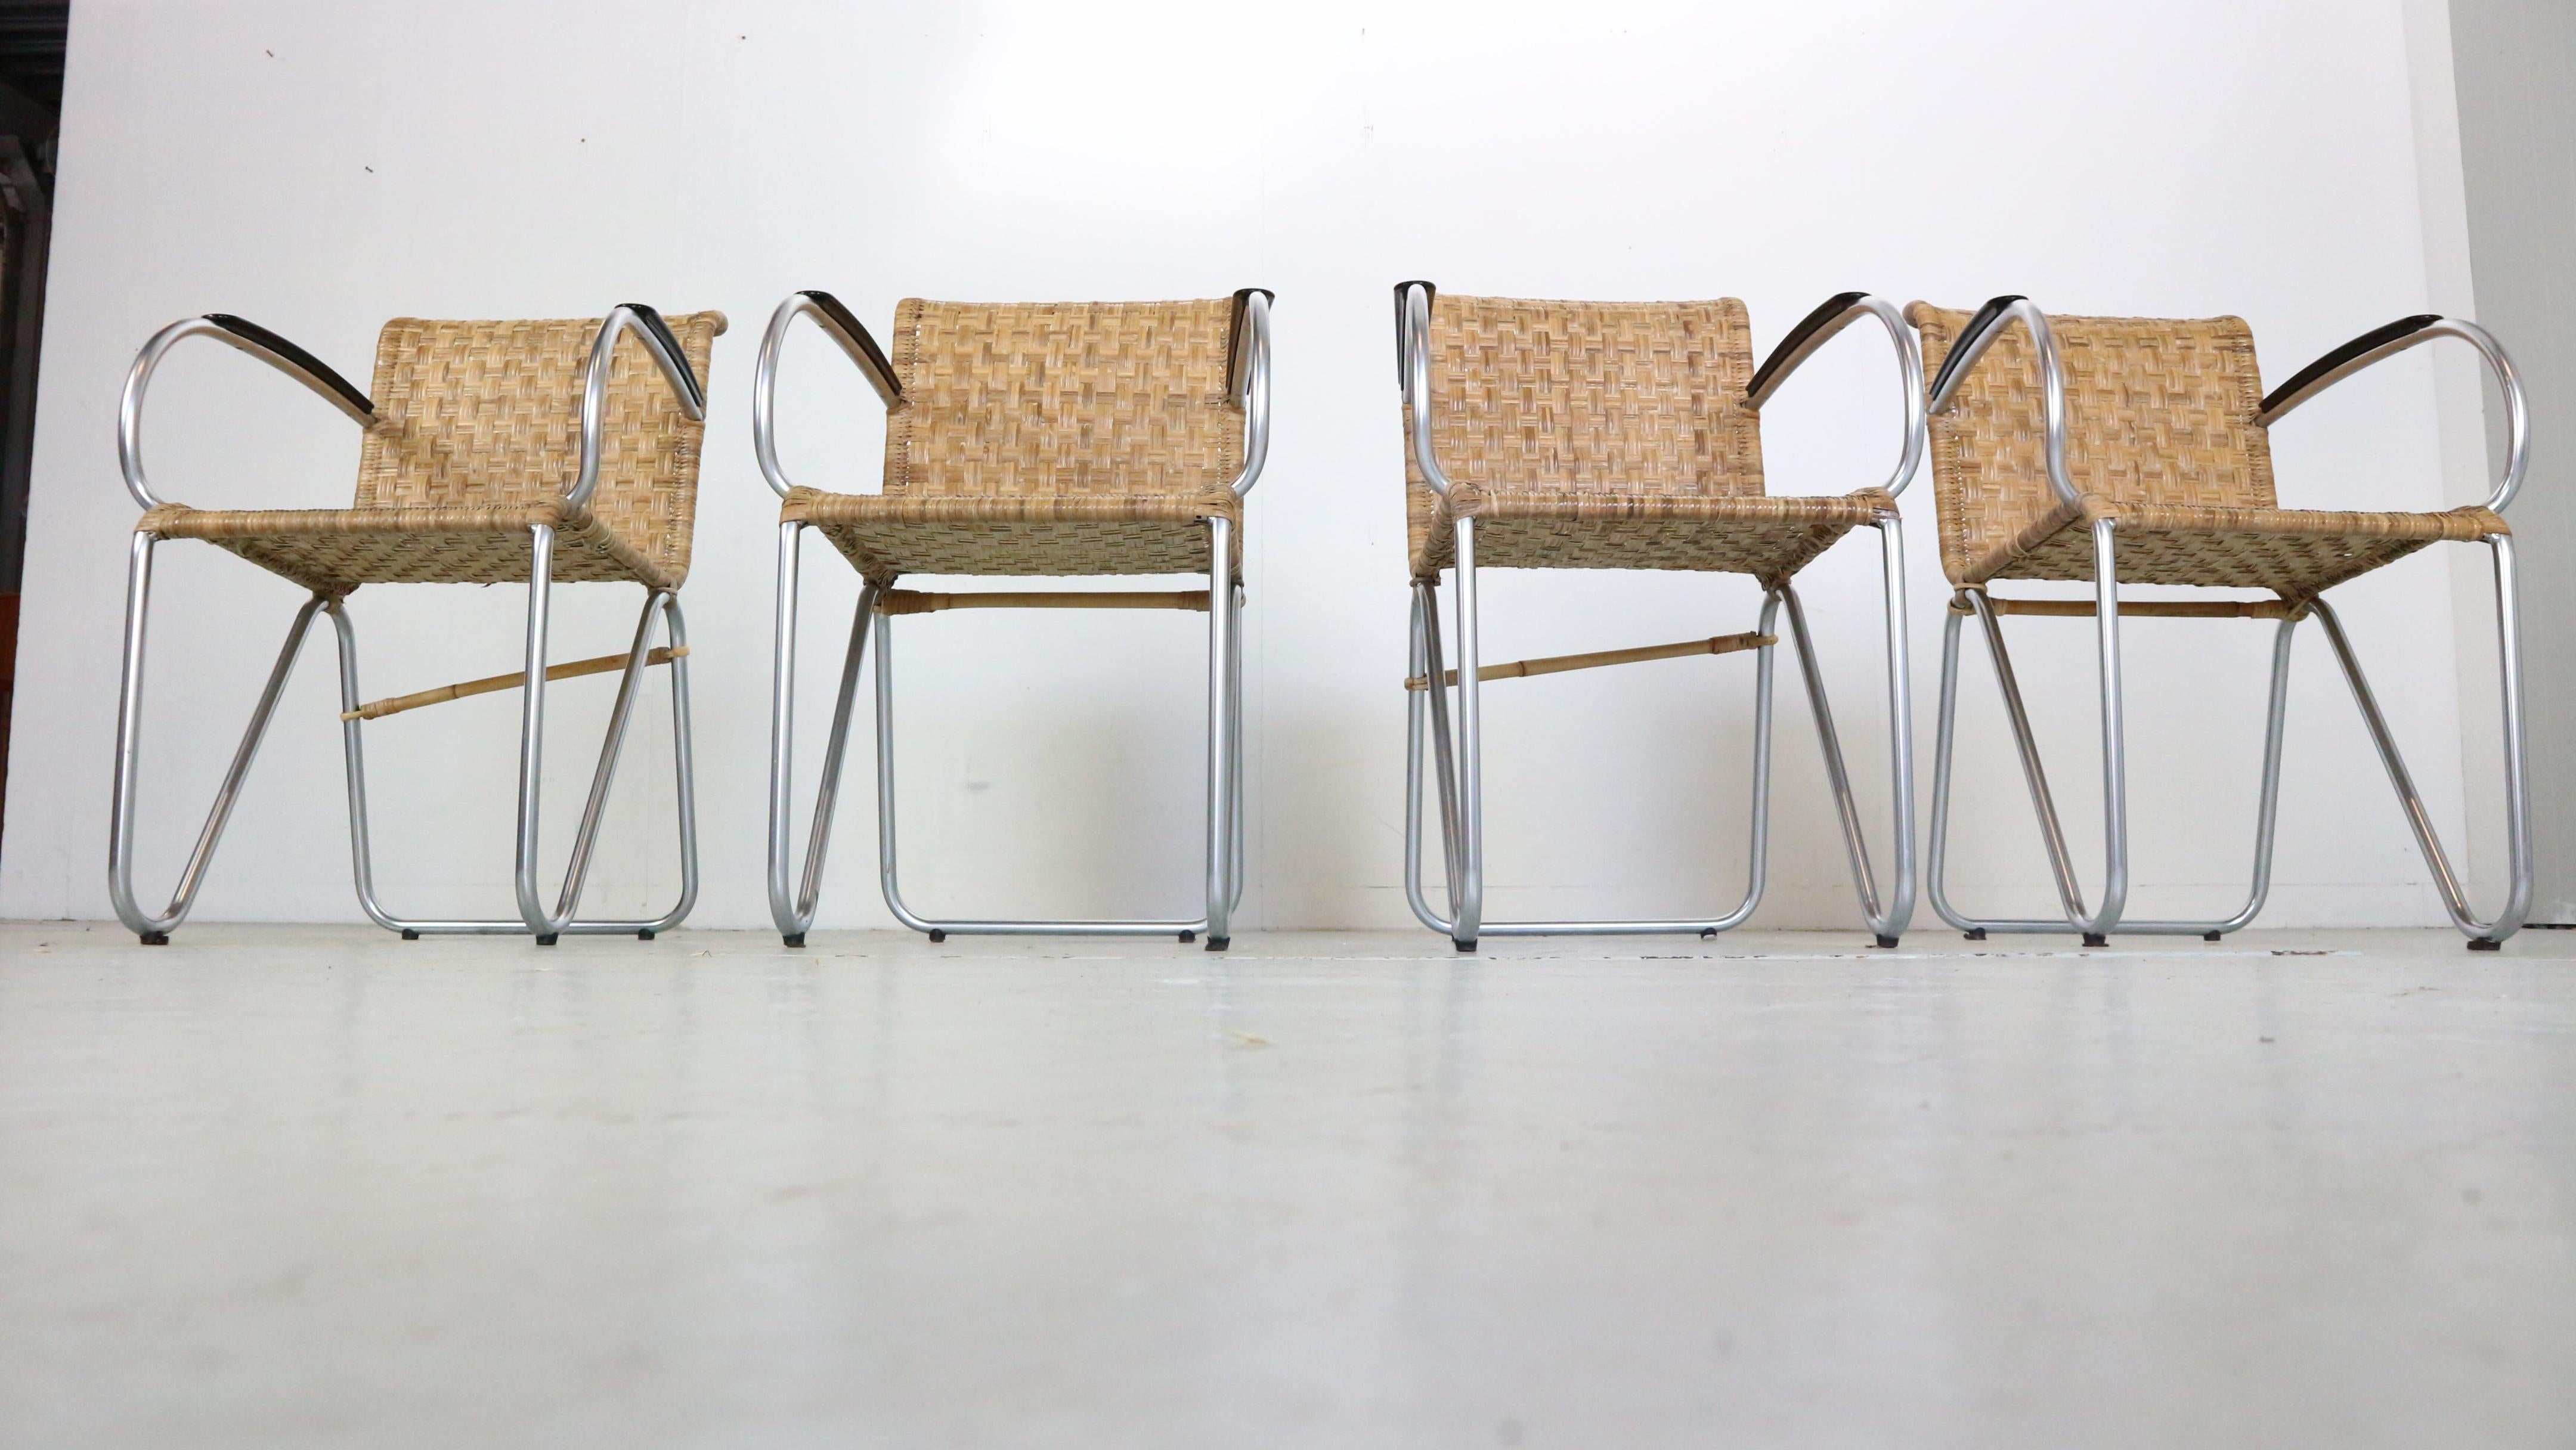 Gispen Set Of 4 Diagonal Wicker& Tube Frame Armchairs, 1930's Dutch Design In Good Condition For Sale In The Hague, NL